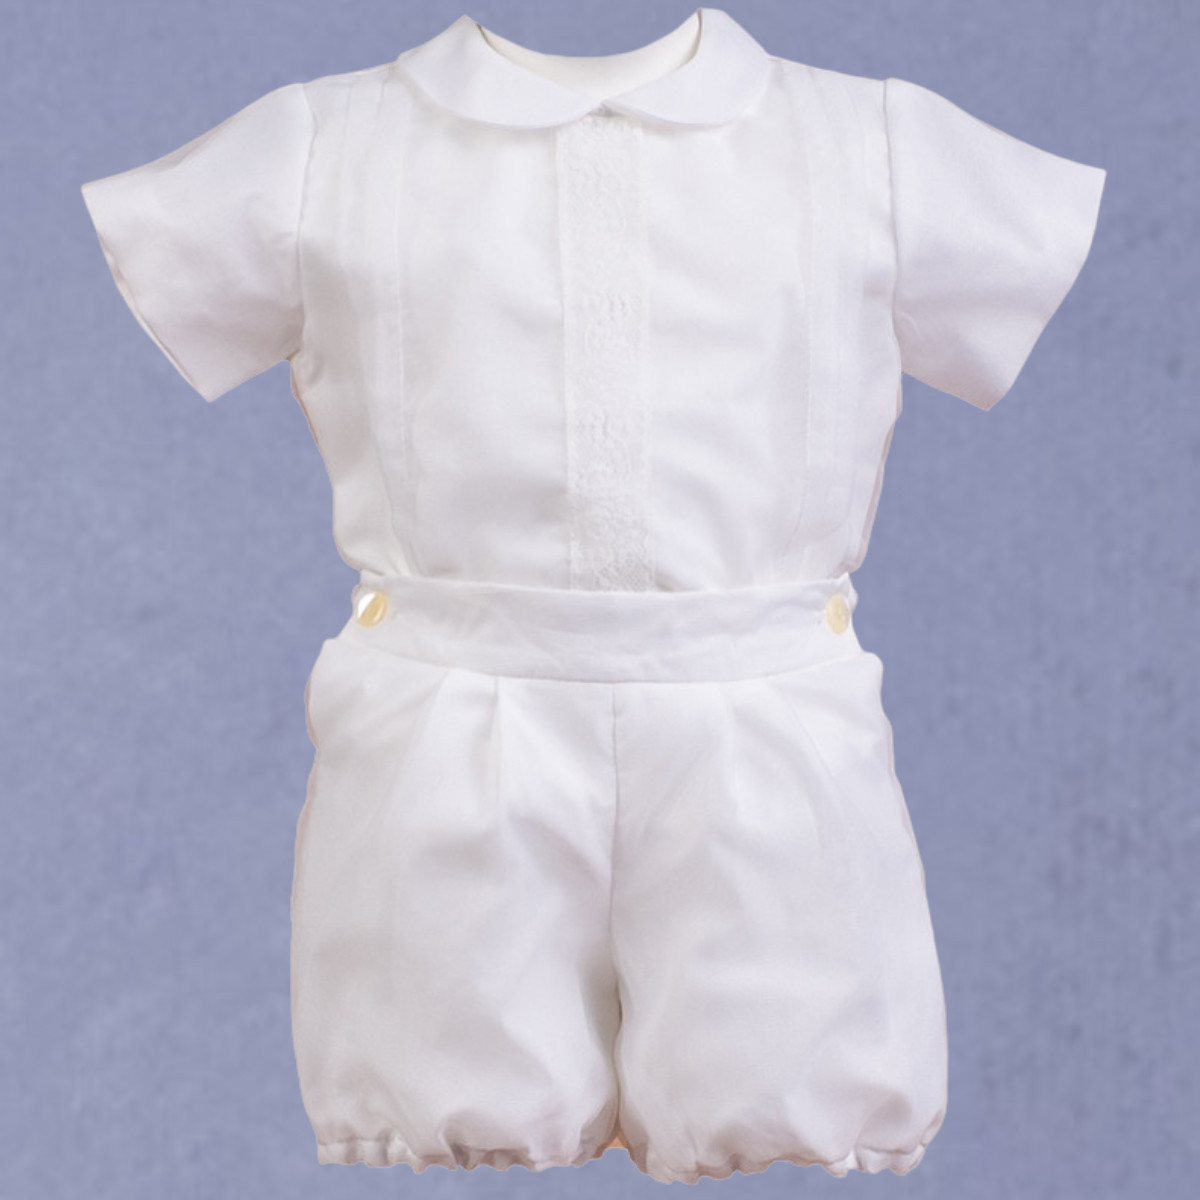 BOYS CHRISTENING OUTFIT WITH JAM PANTS MISHA BABY - 1